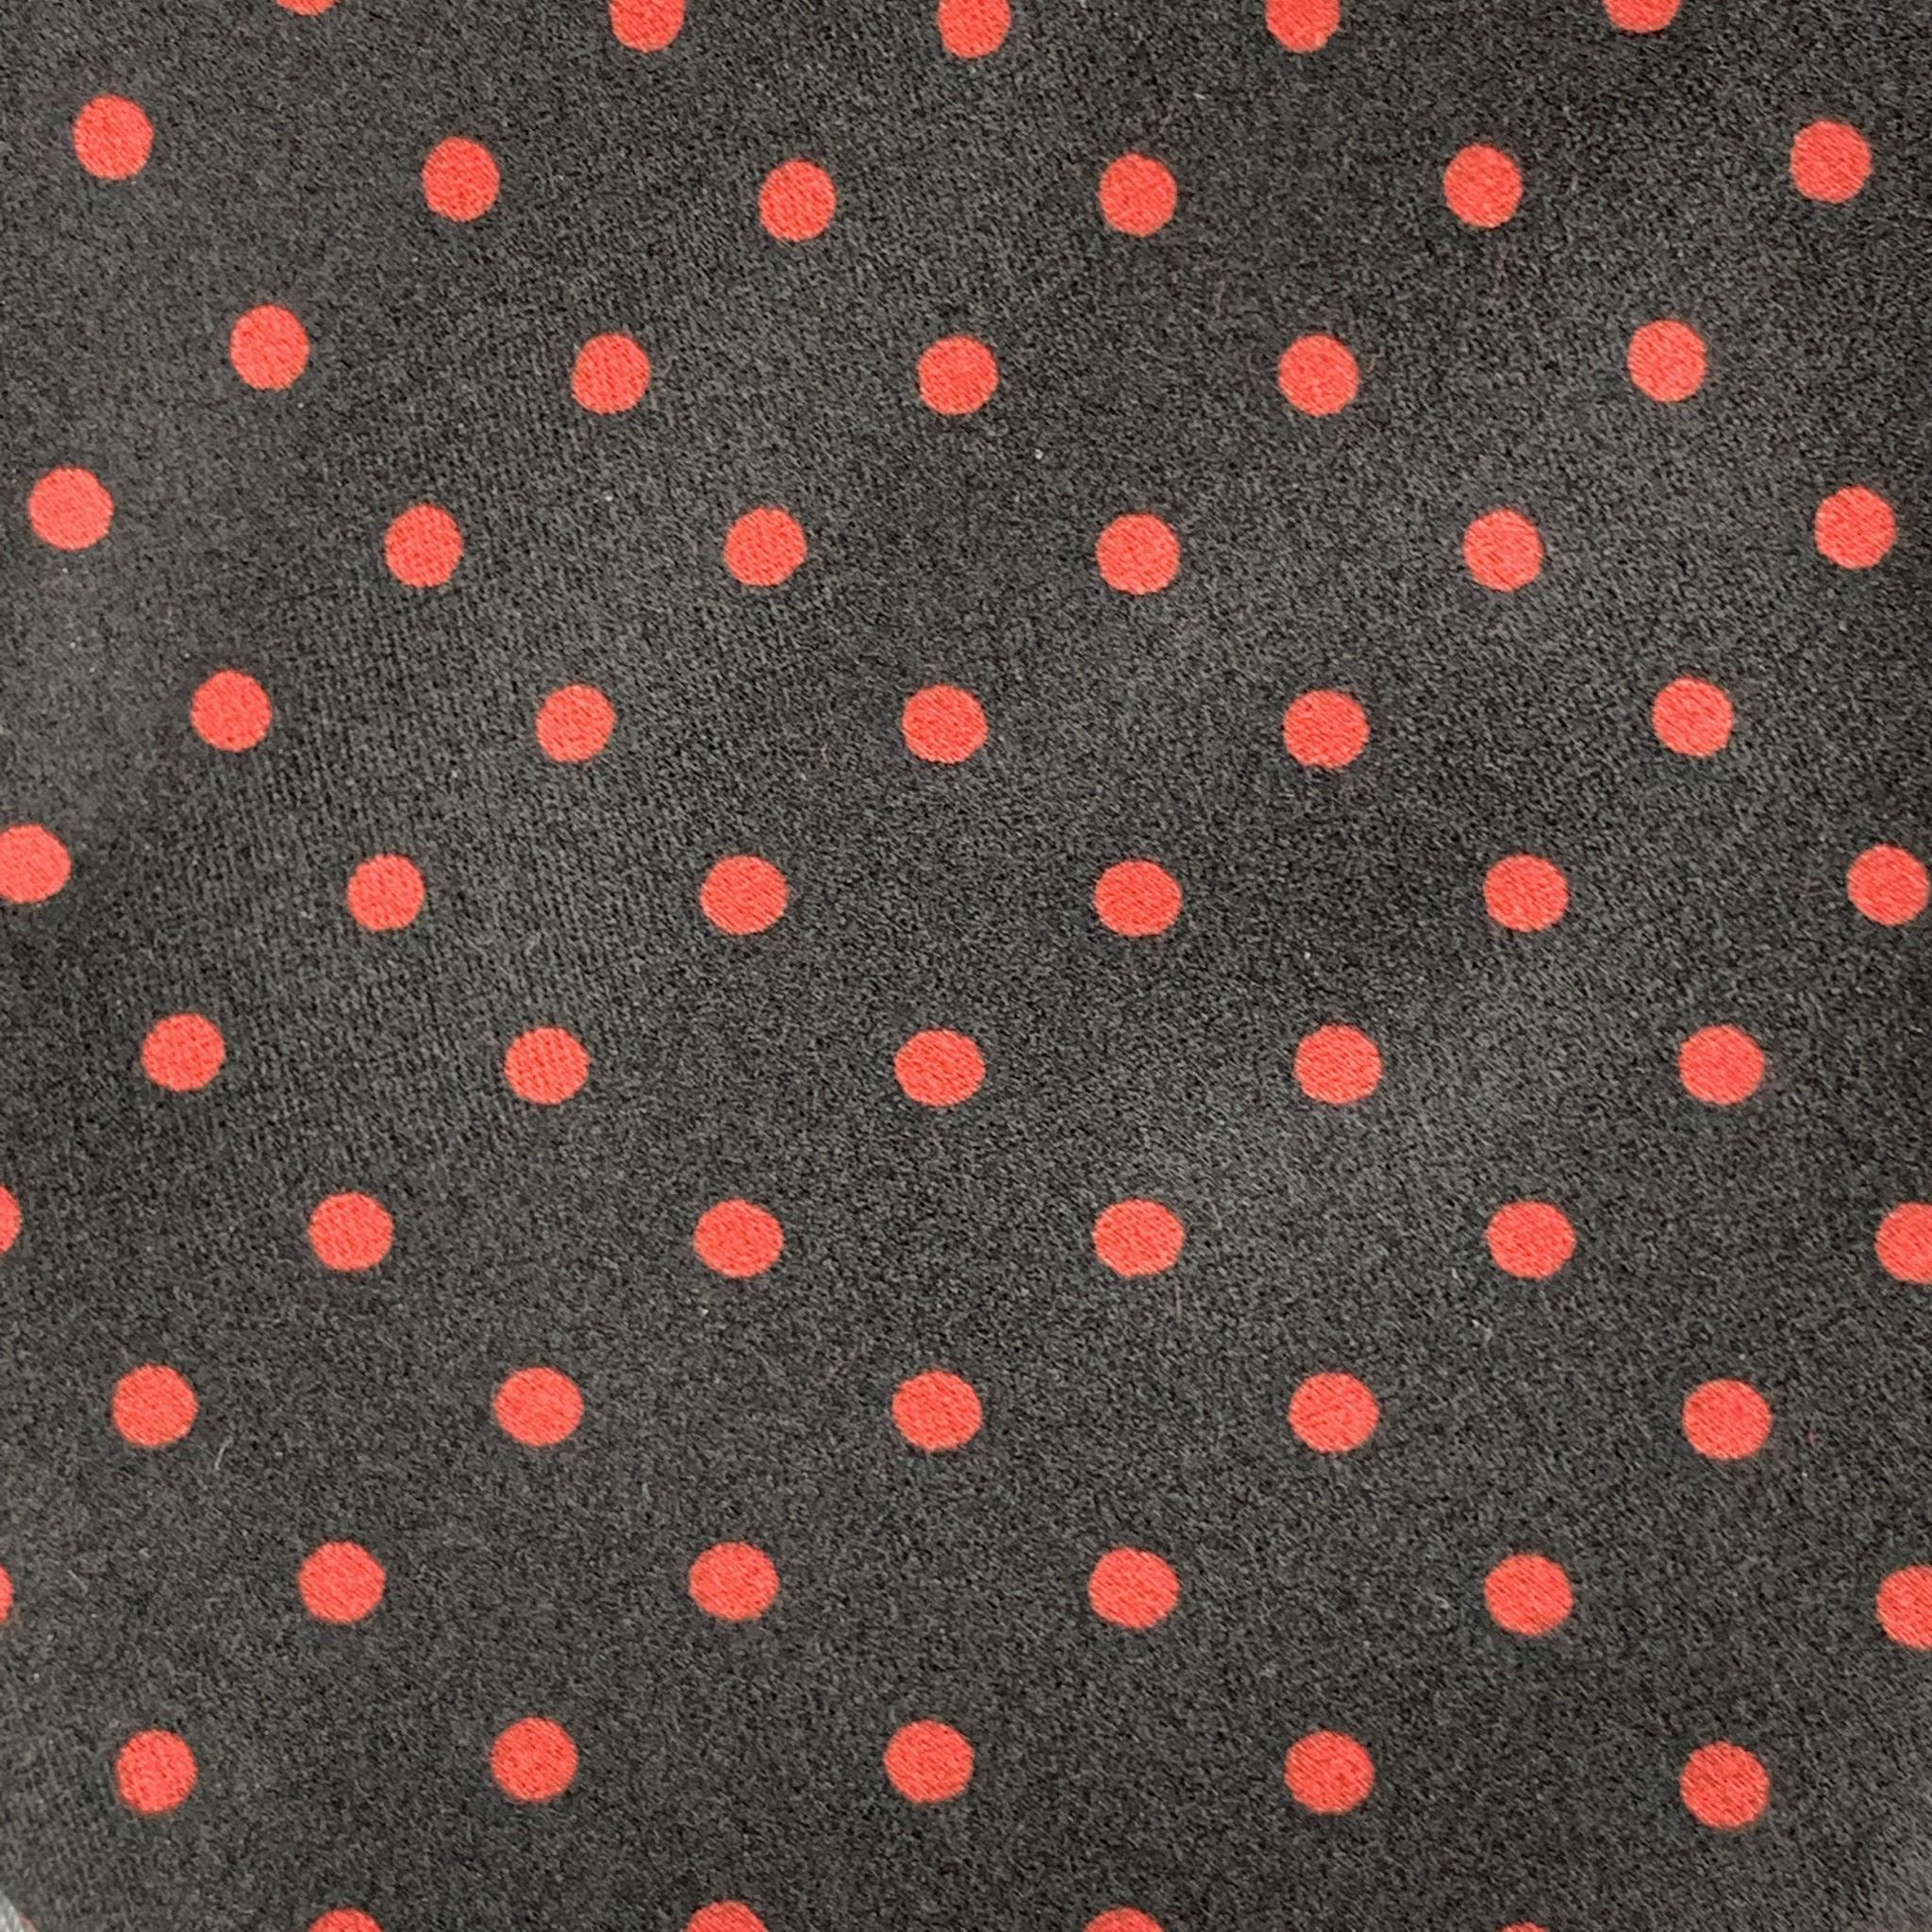 BRIONI necktie comes in black silk with all over red polka dot print. Made in Italy.

Excellent Pre-Owned Condition.

Width: 3.75 in.